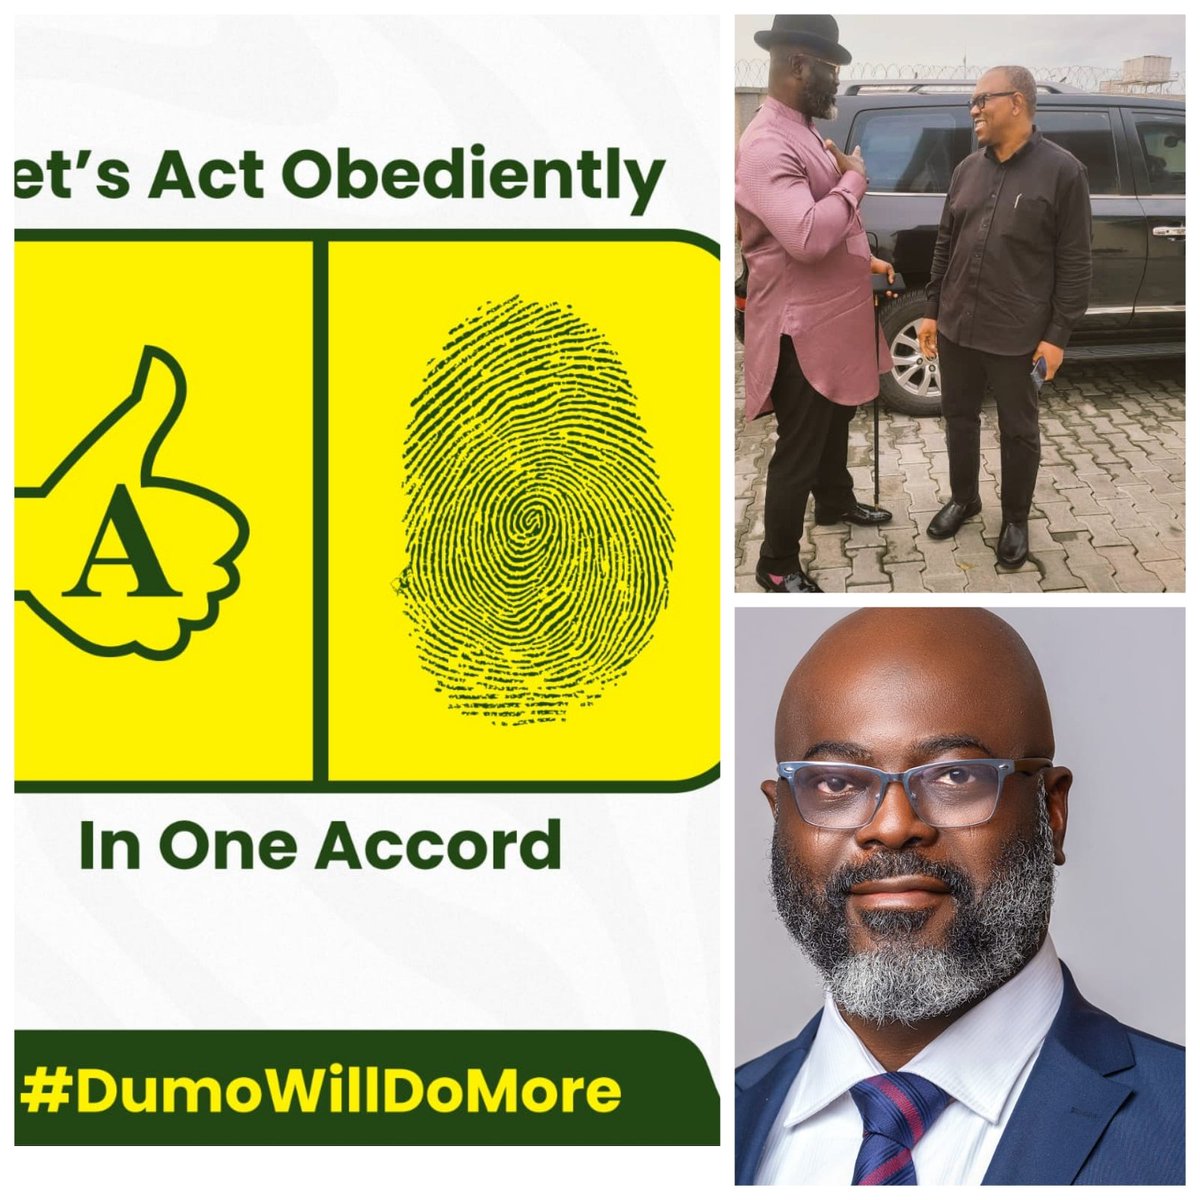 The right man for the job.
The man that will not disappoint Rivers people.
The man with good intentions for his people.
@DumoLuluBriggs will deliver.
Vote Accord 
Vote Dumo.
#Dumowilldomore
#DLB2023.